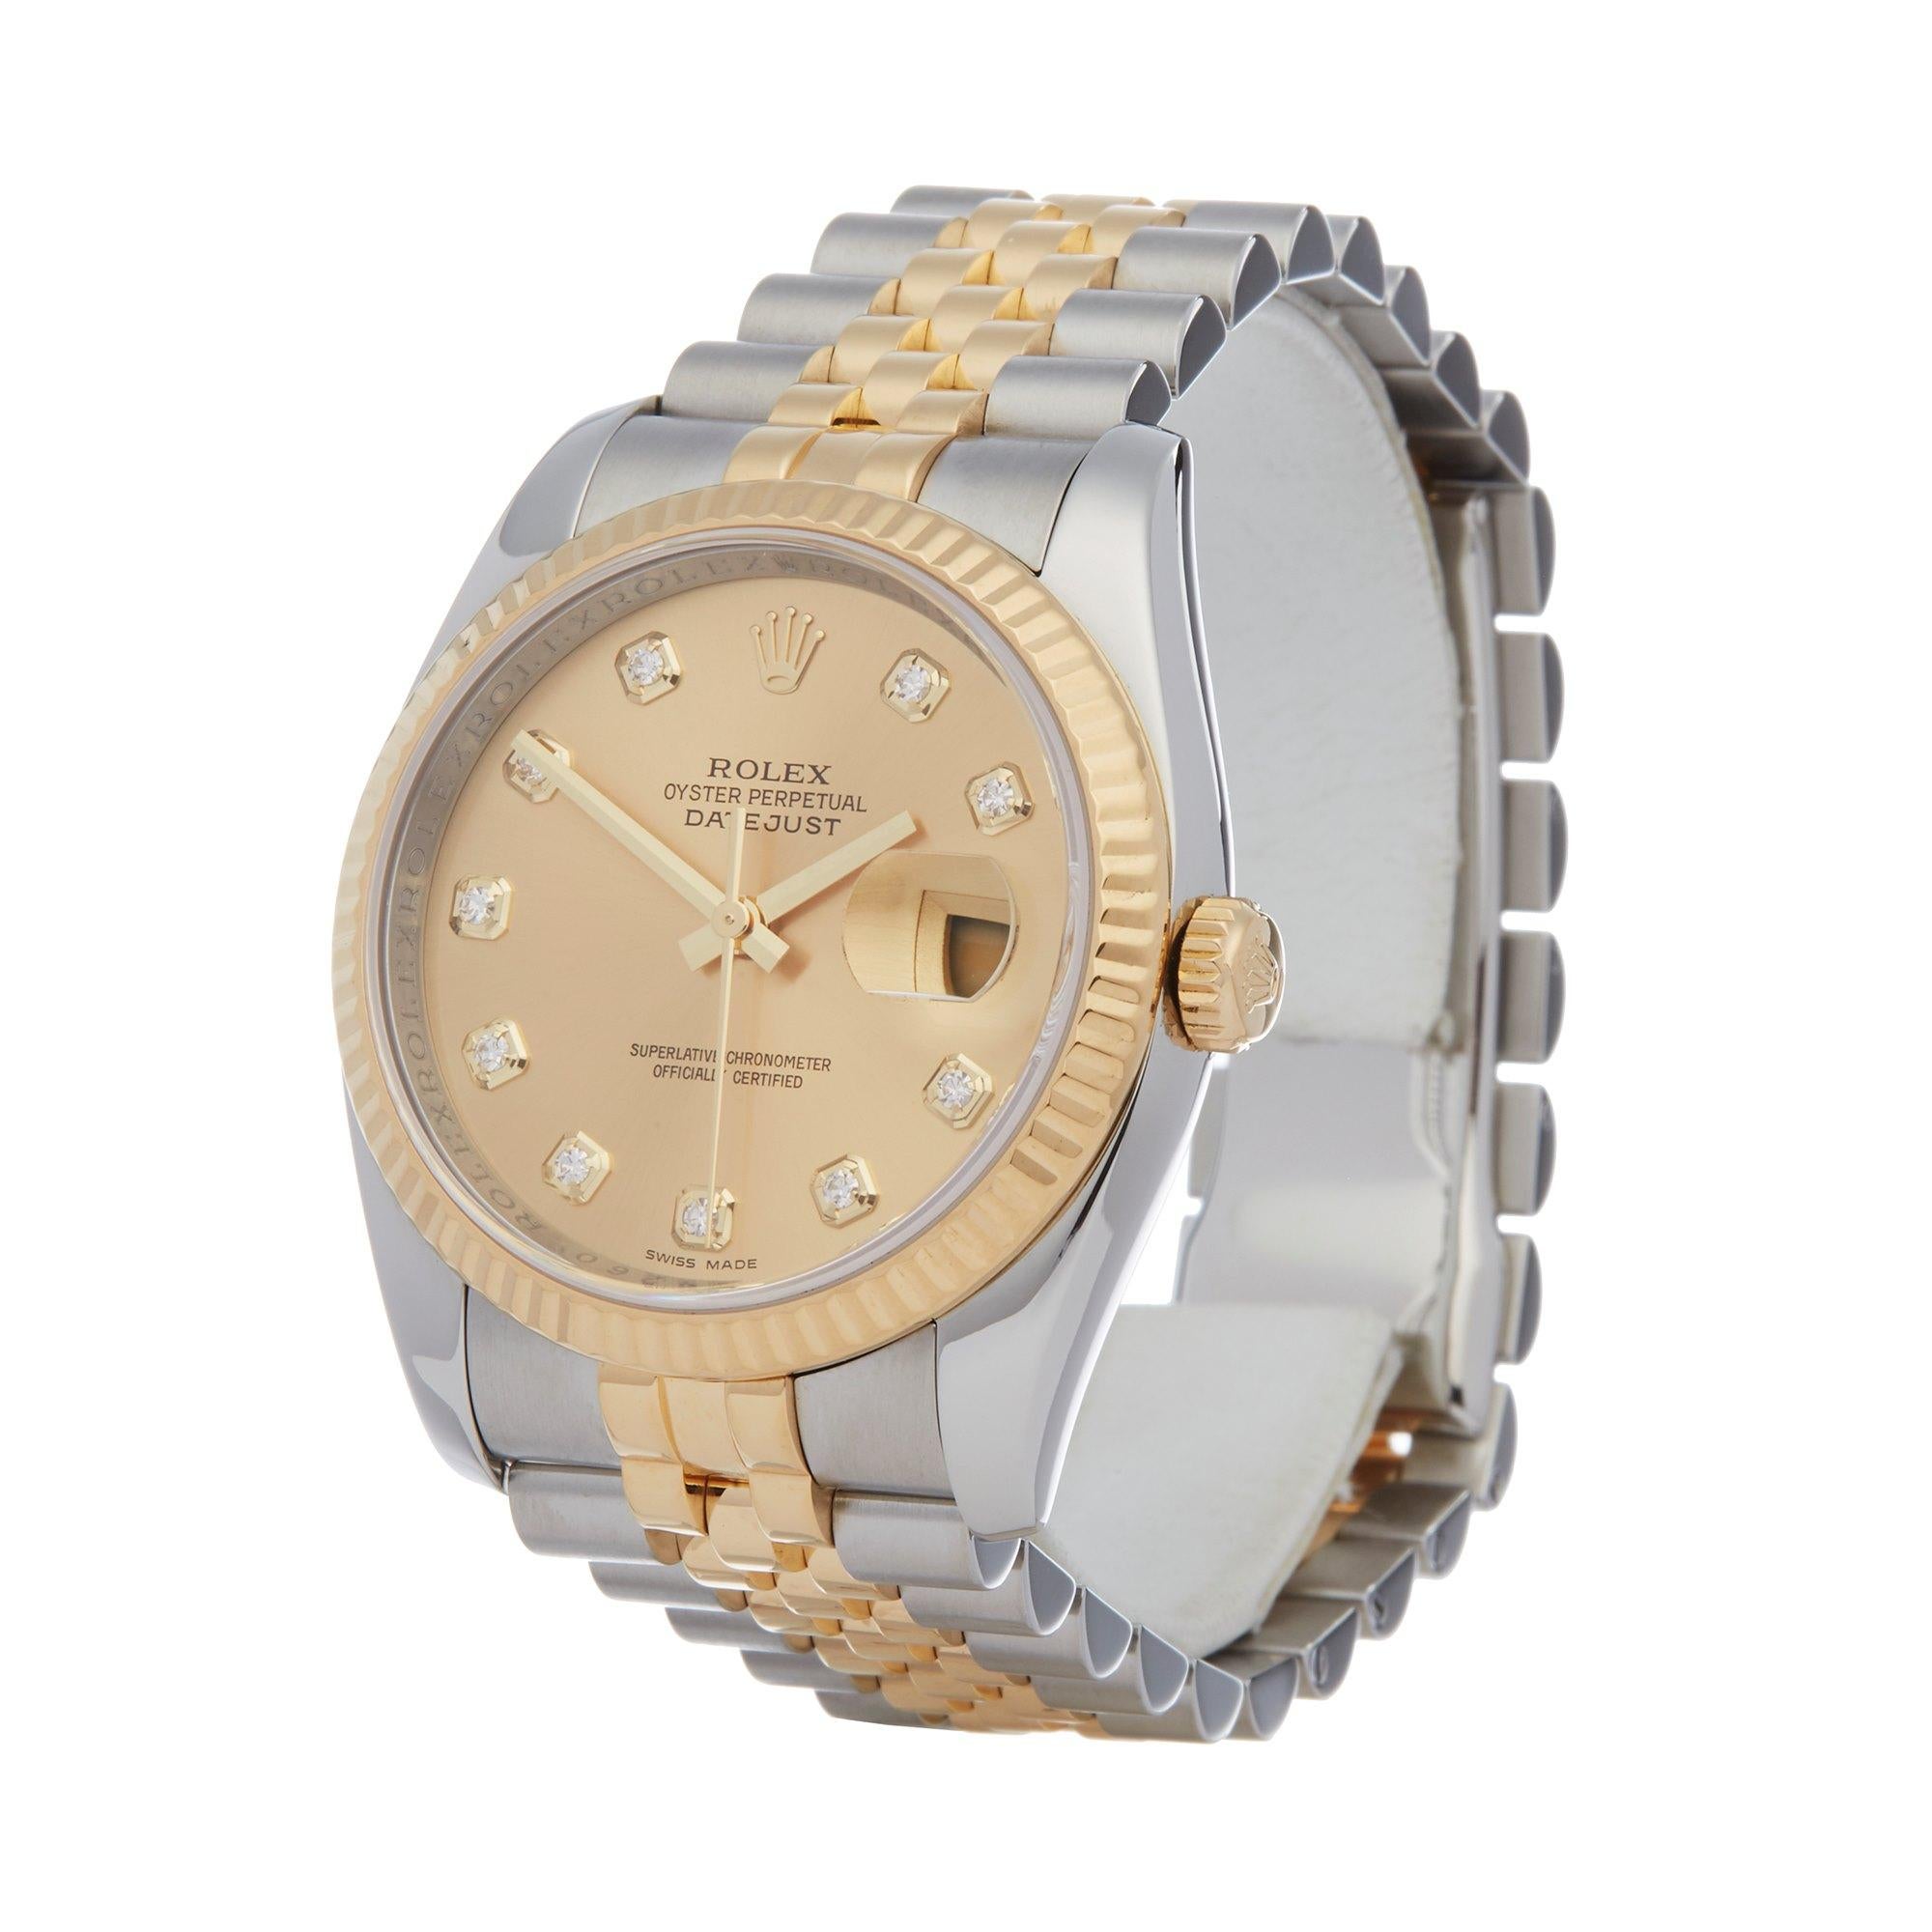 Xupes Reference: W007507
Manufacturer: Rolex
Model: Datejust
Model Variant: 36
Model Number: 116233
Age: 2008
Gender: Unisex
Complete With: Rolex Box 
Dial: Champagne With Diamond Markers
Glass: Sapphire Crystal
Case Size: 36mm
Case Material: